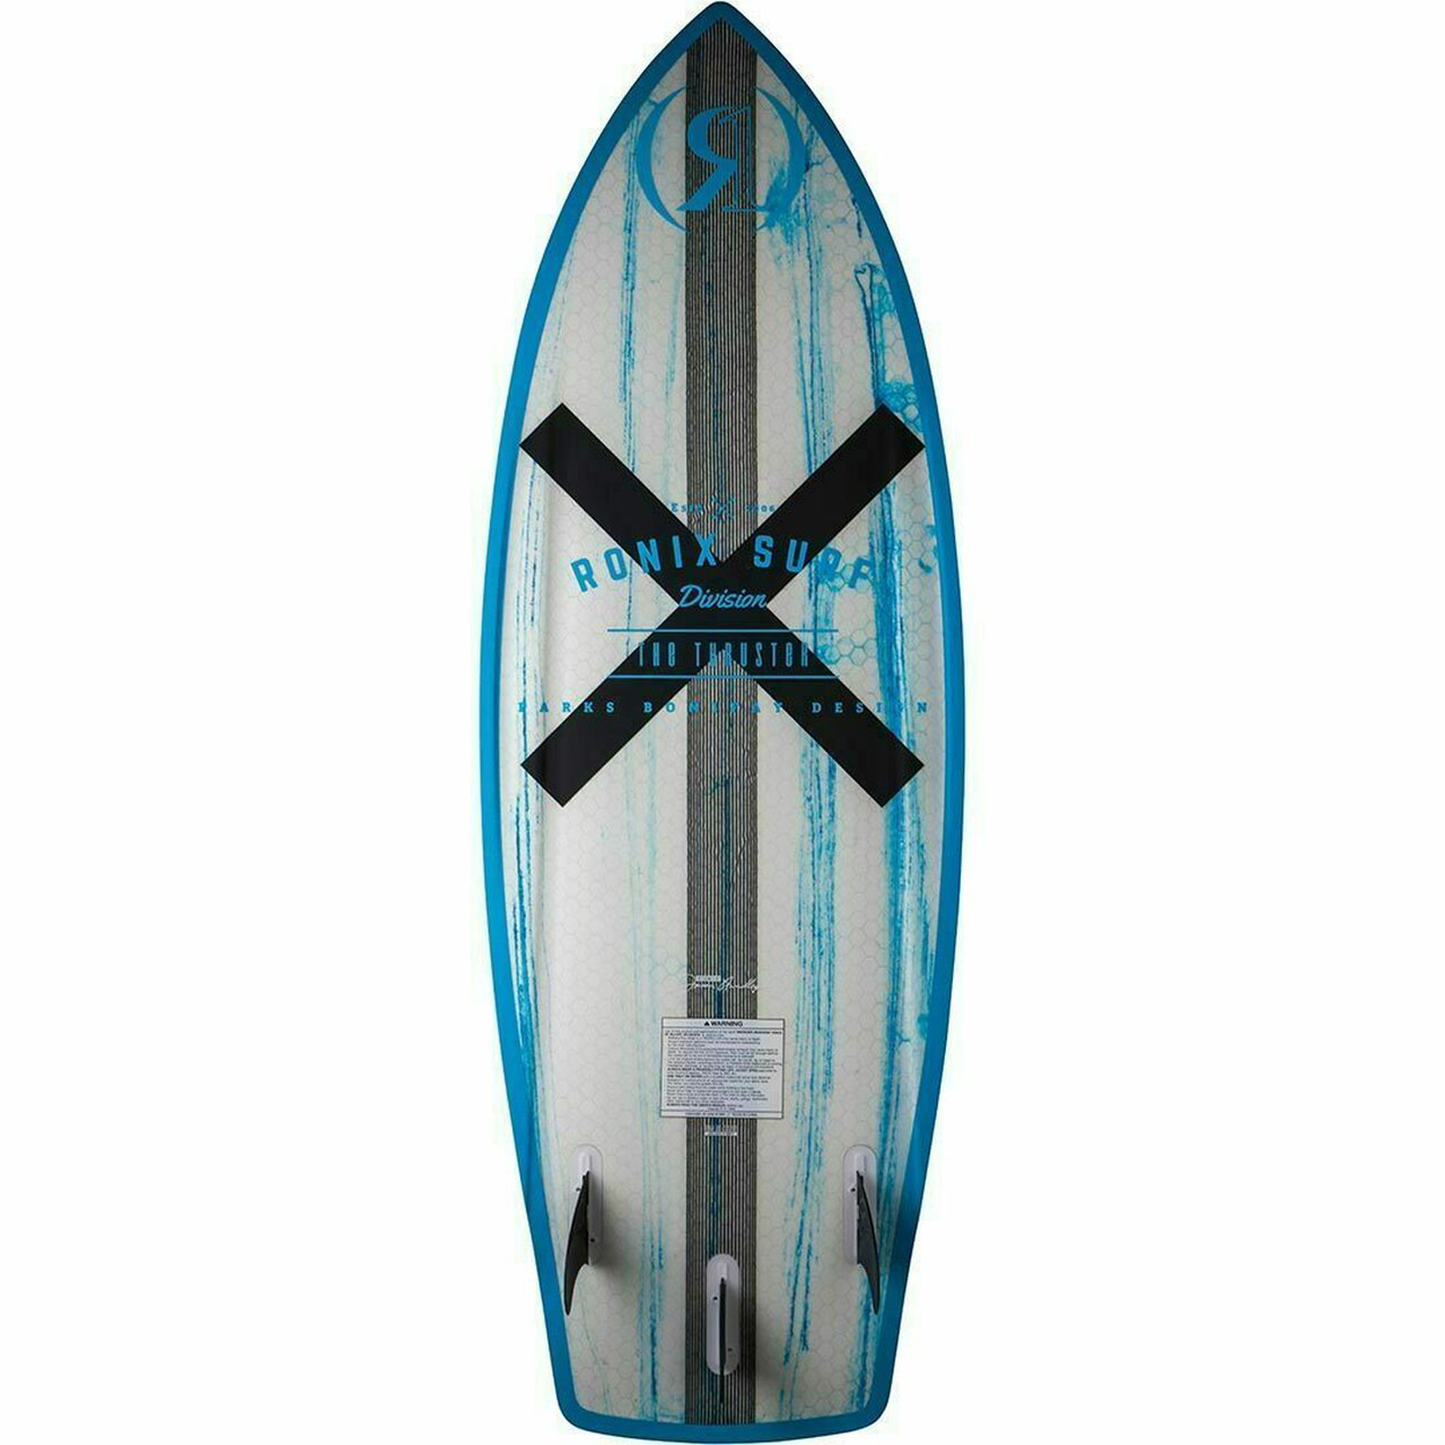 Bottom view of the Ronix Hex Thruster wake surf board